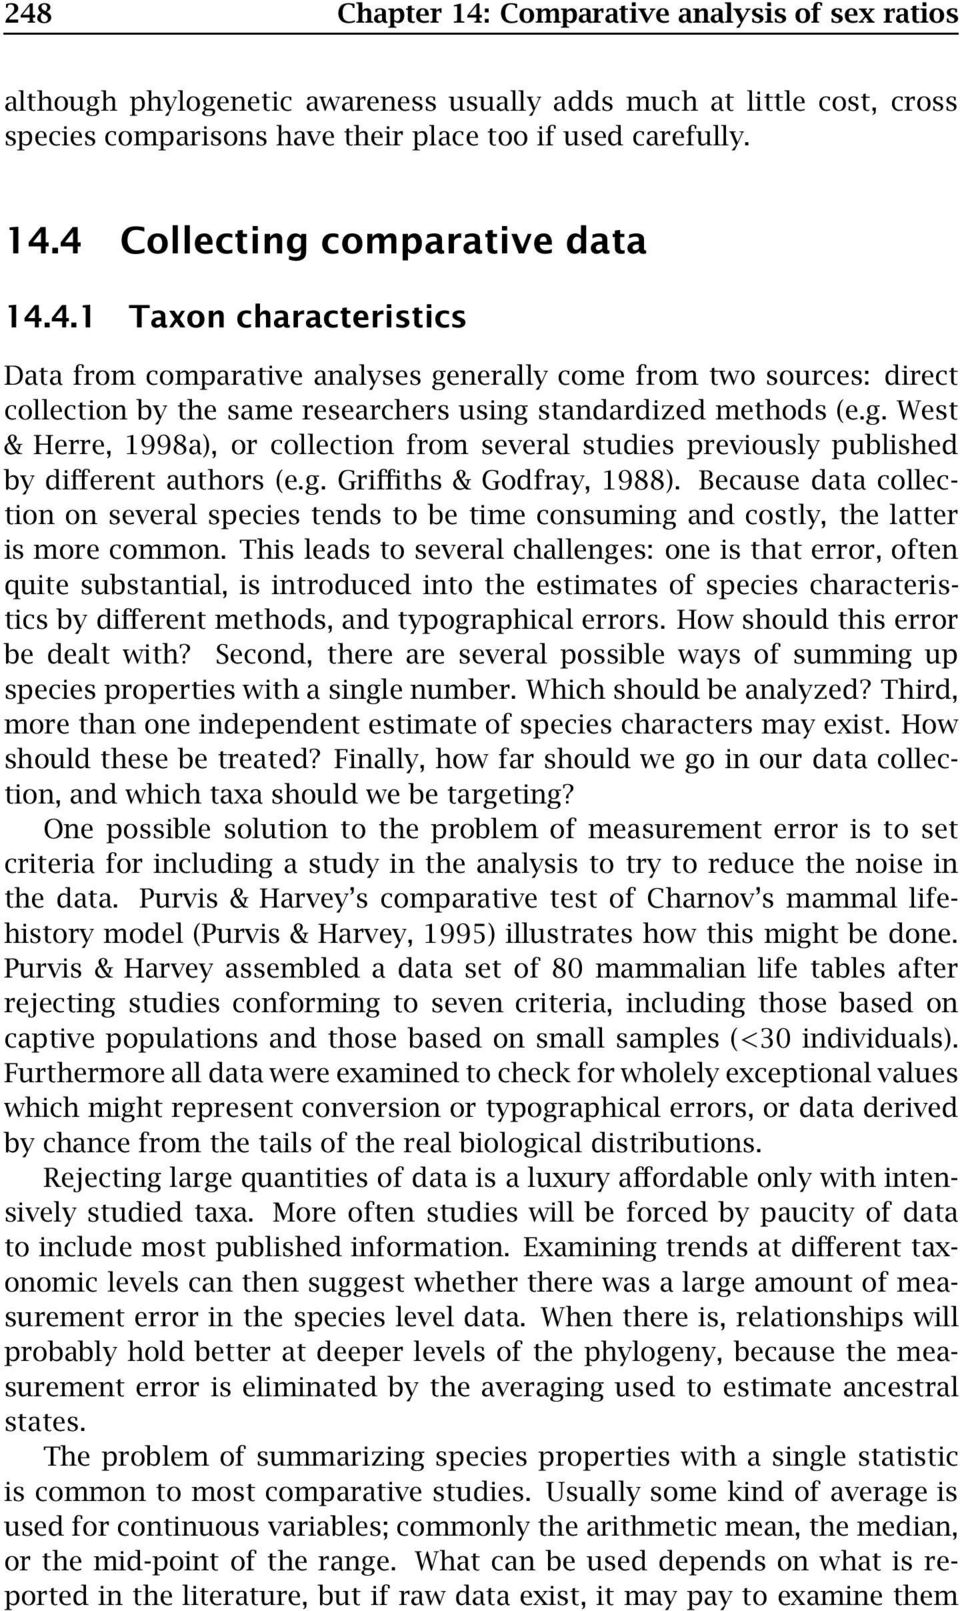 g. Griffiths & Godfray, 1988). Because data collection on several species tends to be time consuming and costly, the latter is more common.